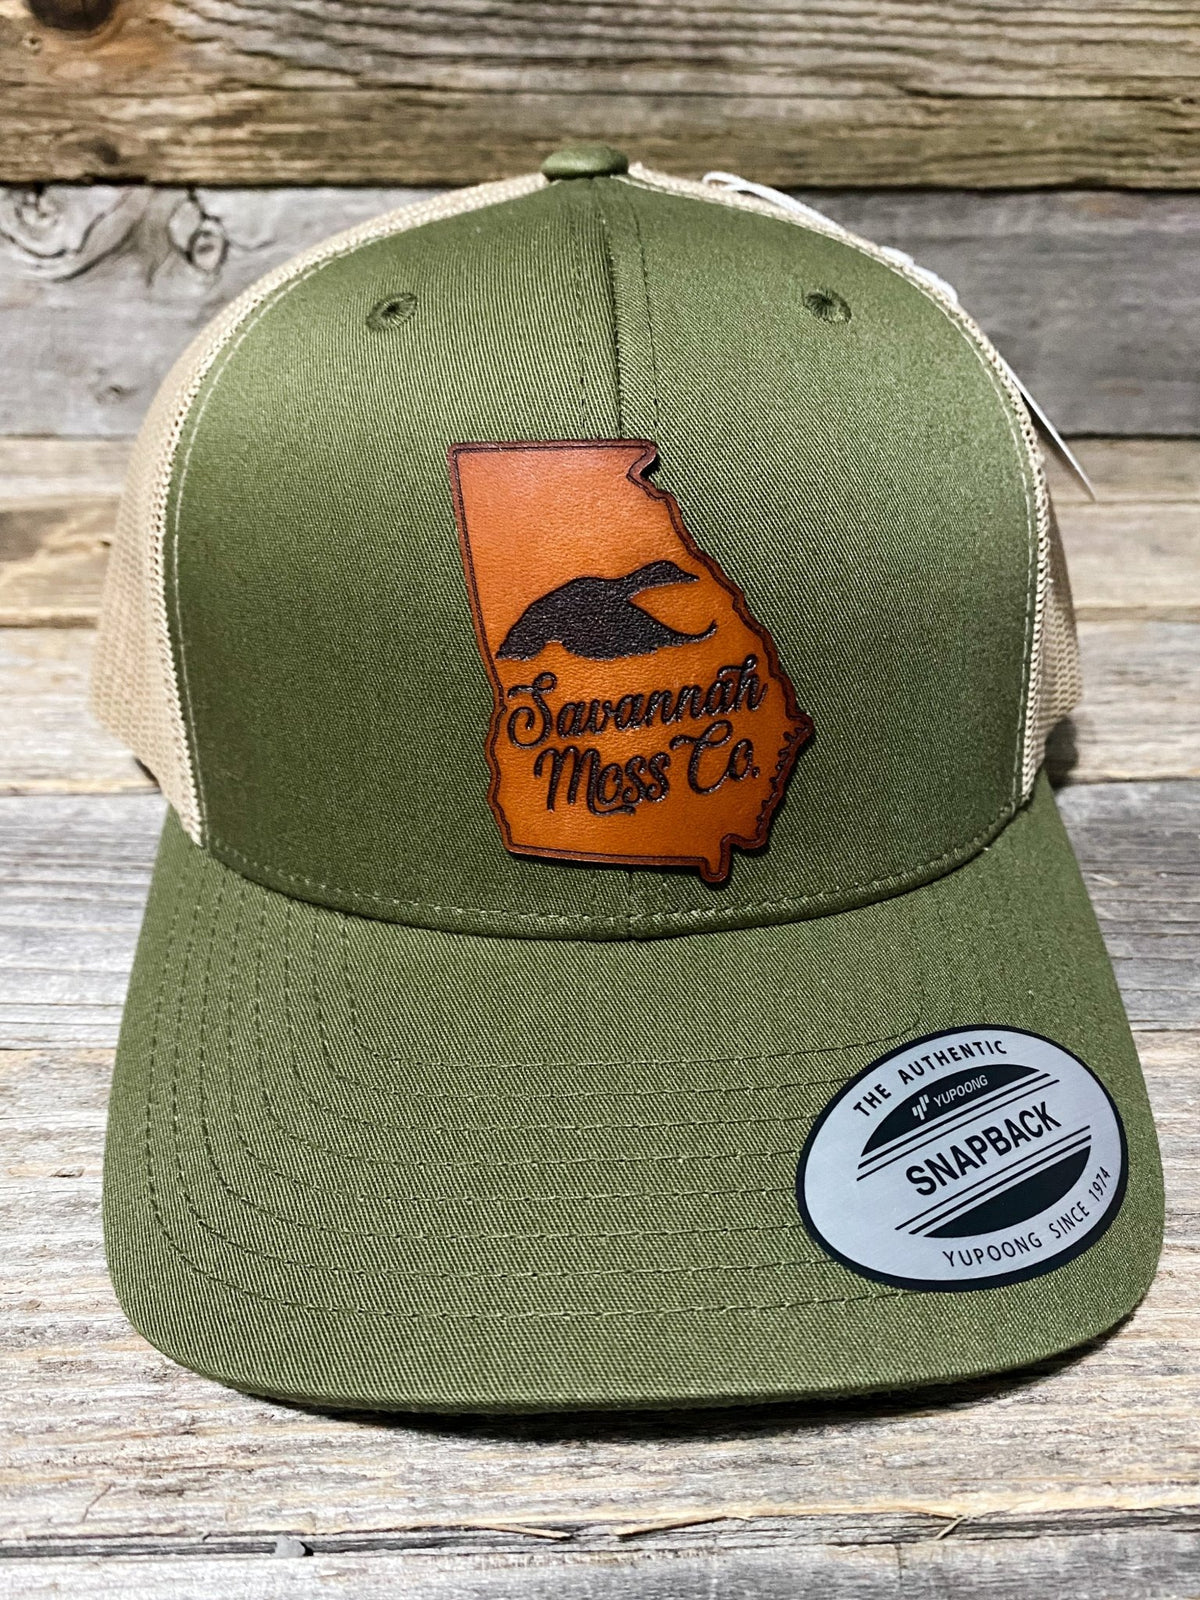 Custom Name Hat - Leather Patch - Many Colors - Motion Ducks, LLC